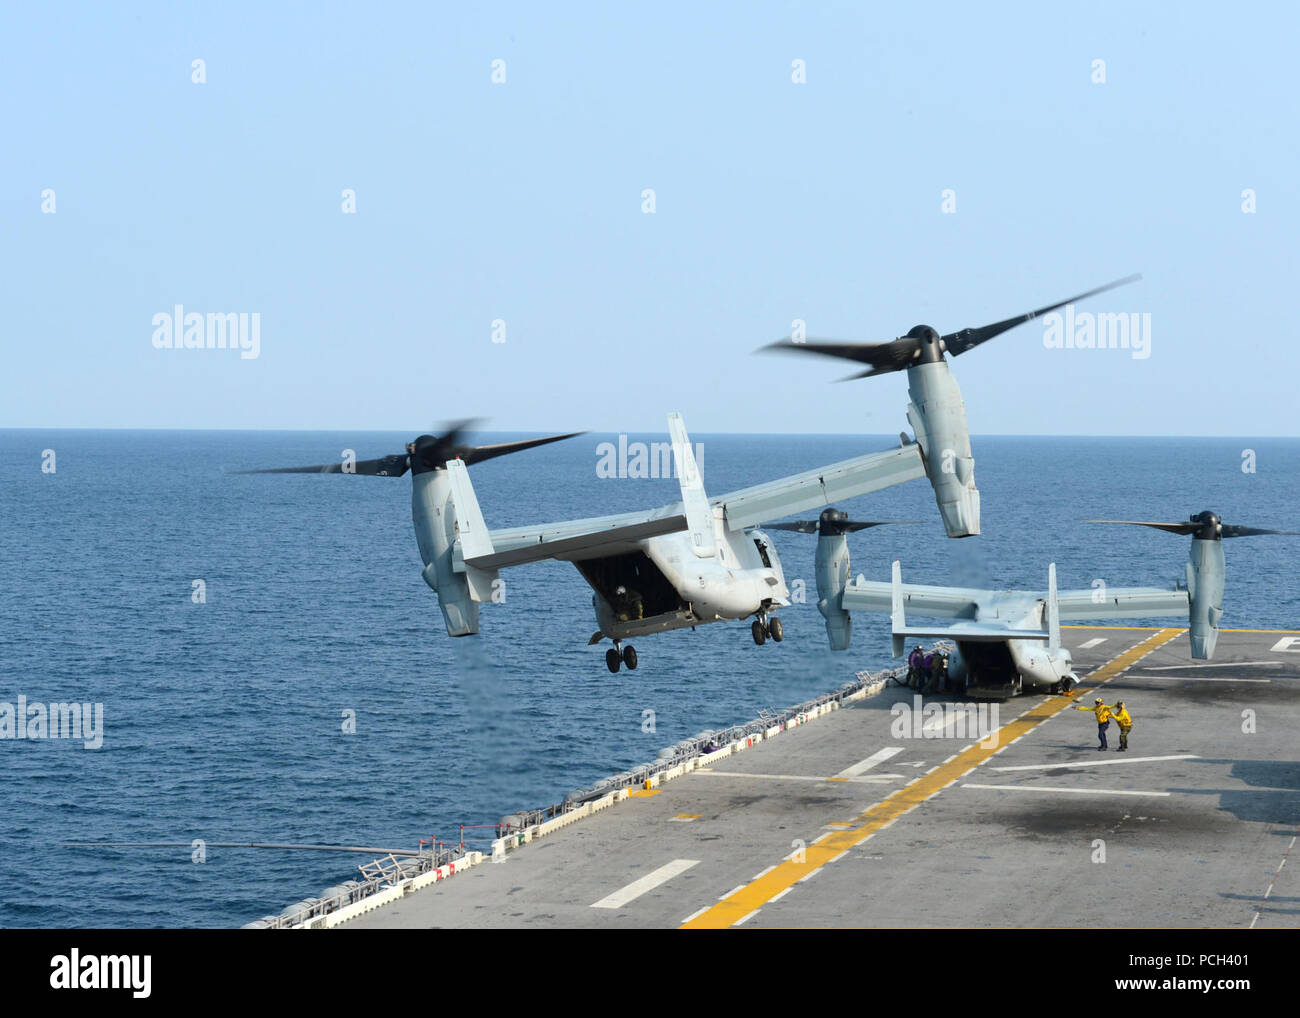 A U.S. Marine Corps MV-22B Osprey tiltrotor aircraft assigned to Marine Medium Tiltrotor Squadron (VMM) 265 takes off from the amphibious assault ship USS Bonhomme Richard (LHD 6) in the East China Sea April 11, 2014. The Bonhomme Richard was underway in the U.S. 7th Fleet area of responsibility supporting maritime security operations and theater security cooperation efforts. Stock Photo